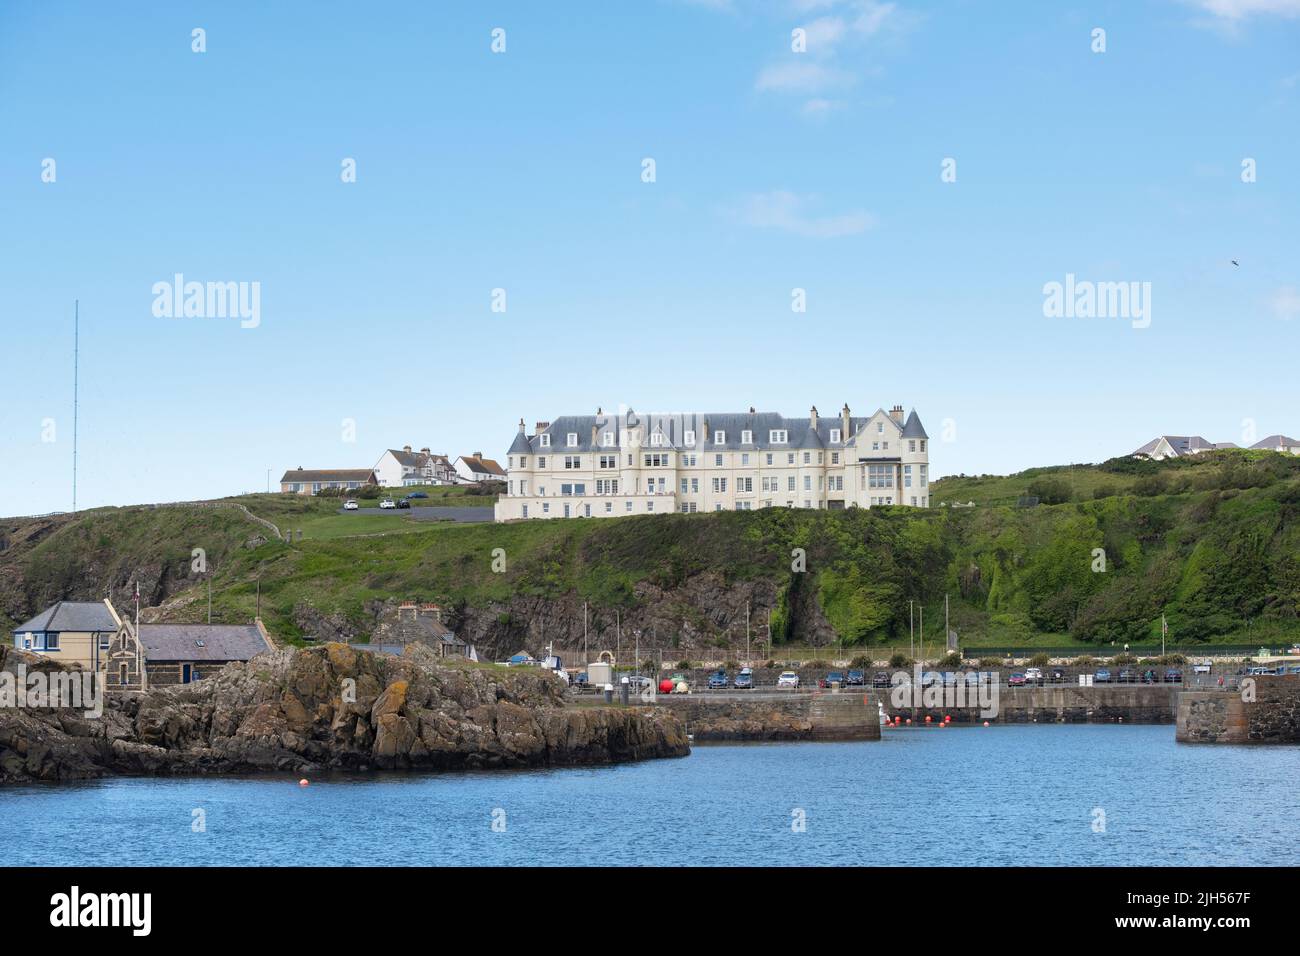 Portpatrick hotel in summer. Wigtownshire, Dumfries and Galloway, Scotland. Stock Photo